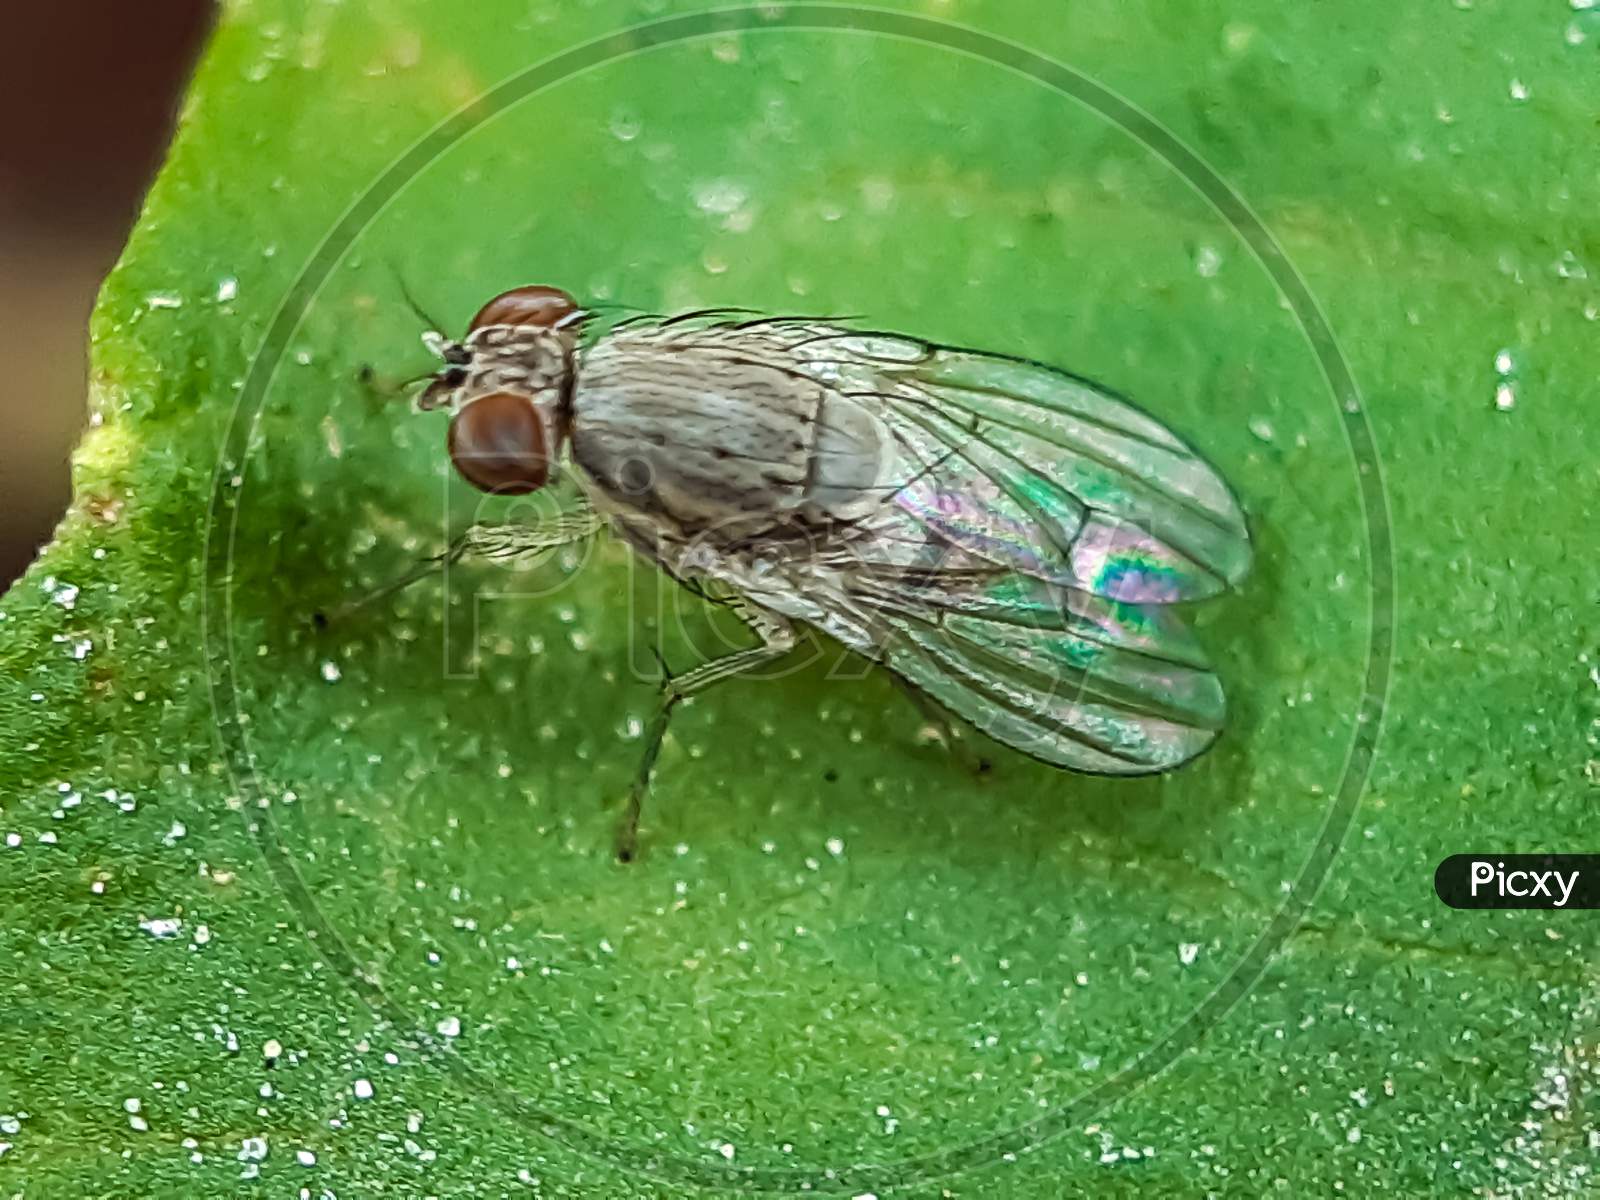 There Is A Fly Sitting On The Green Leaves And The Green Background.